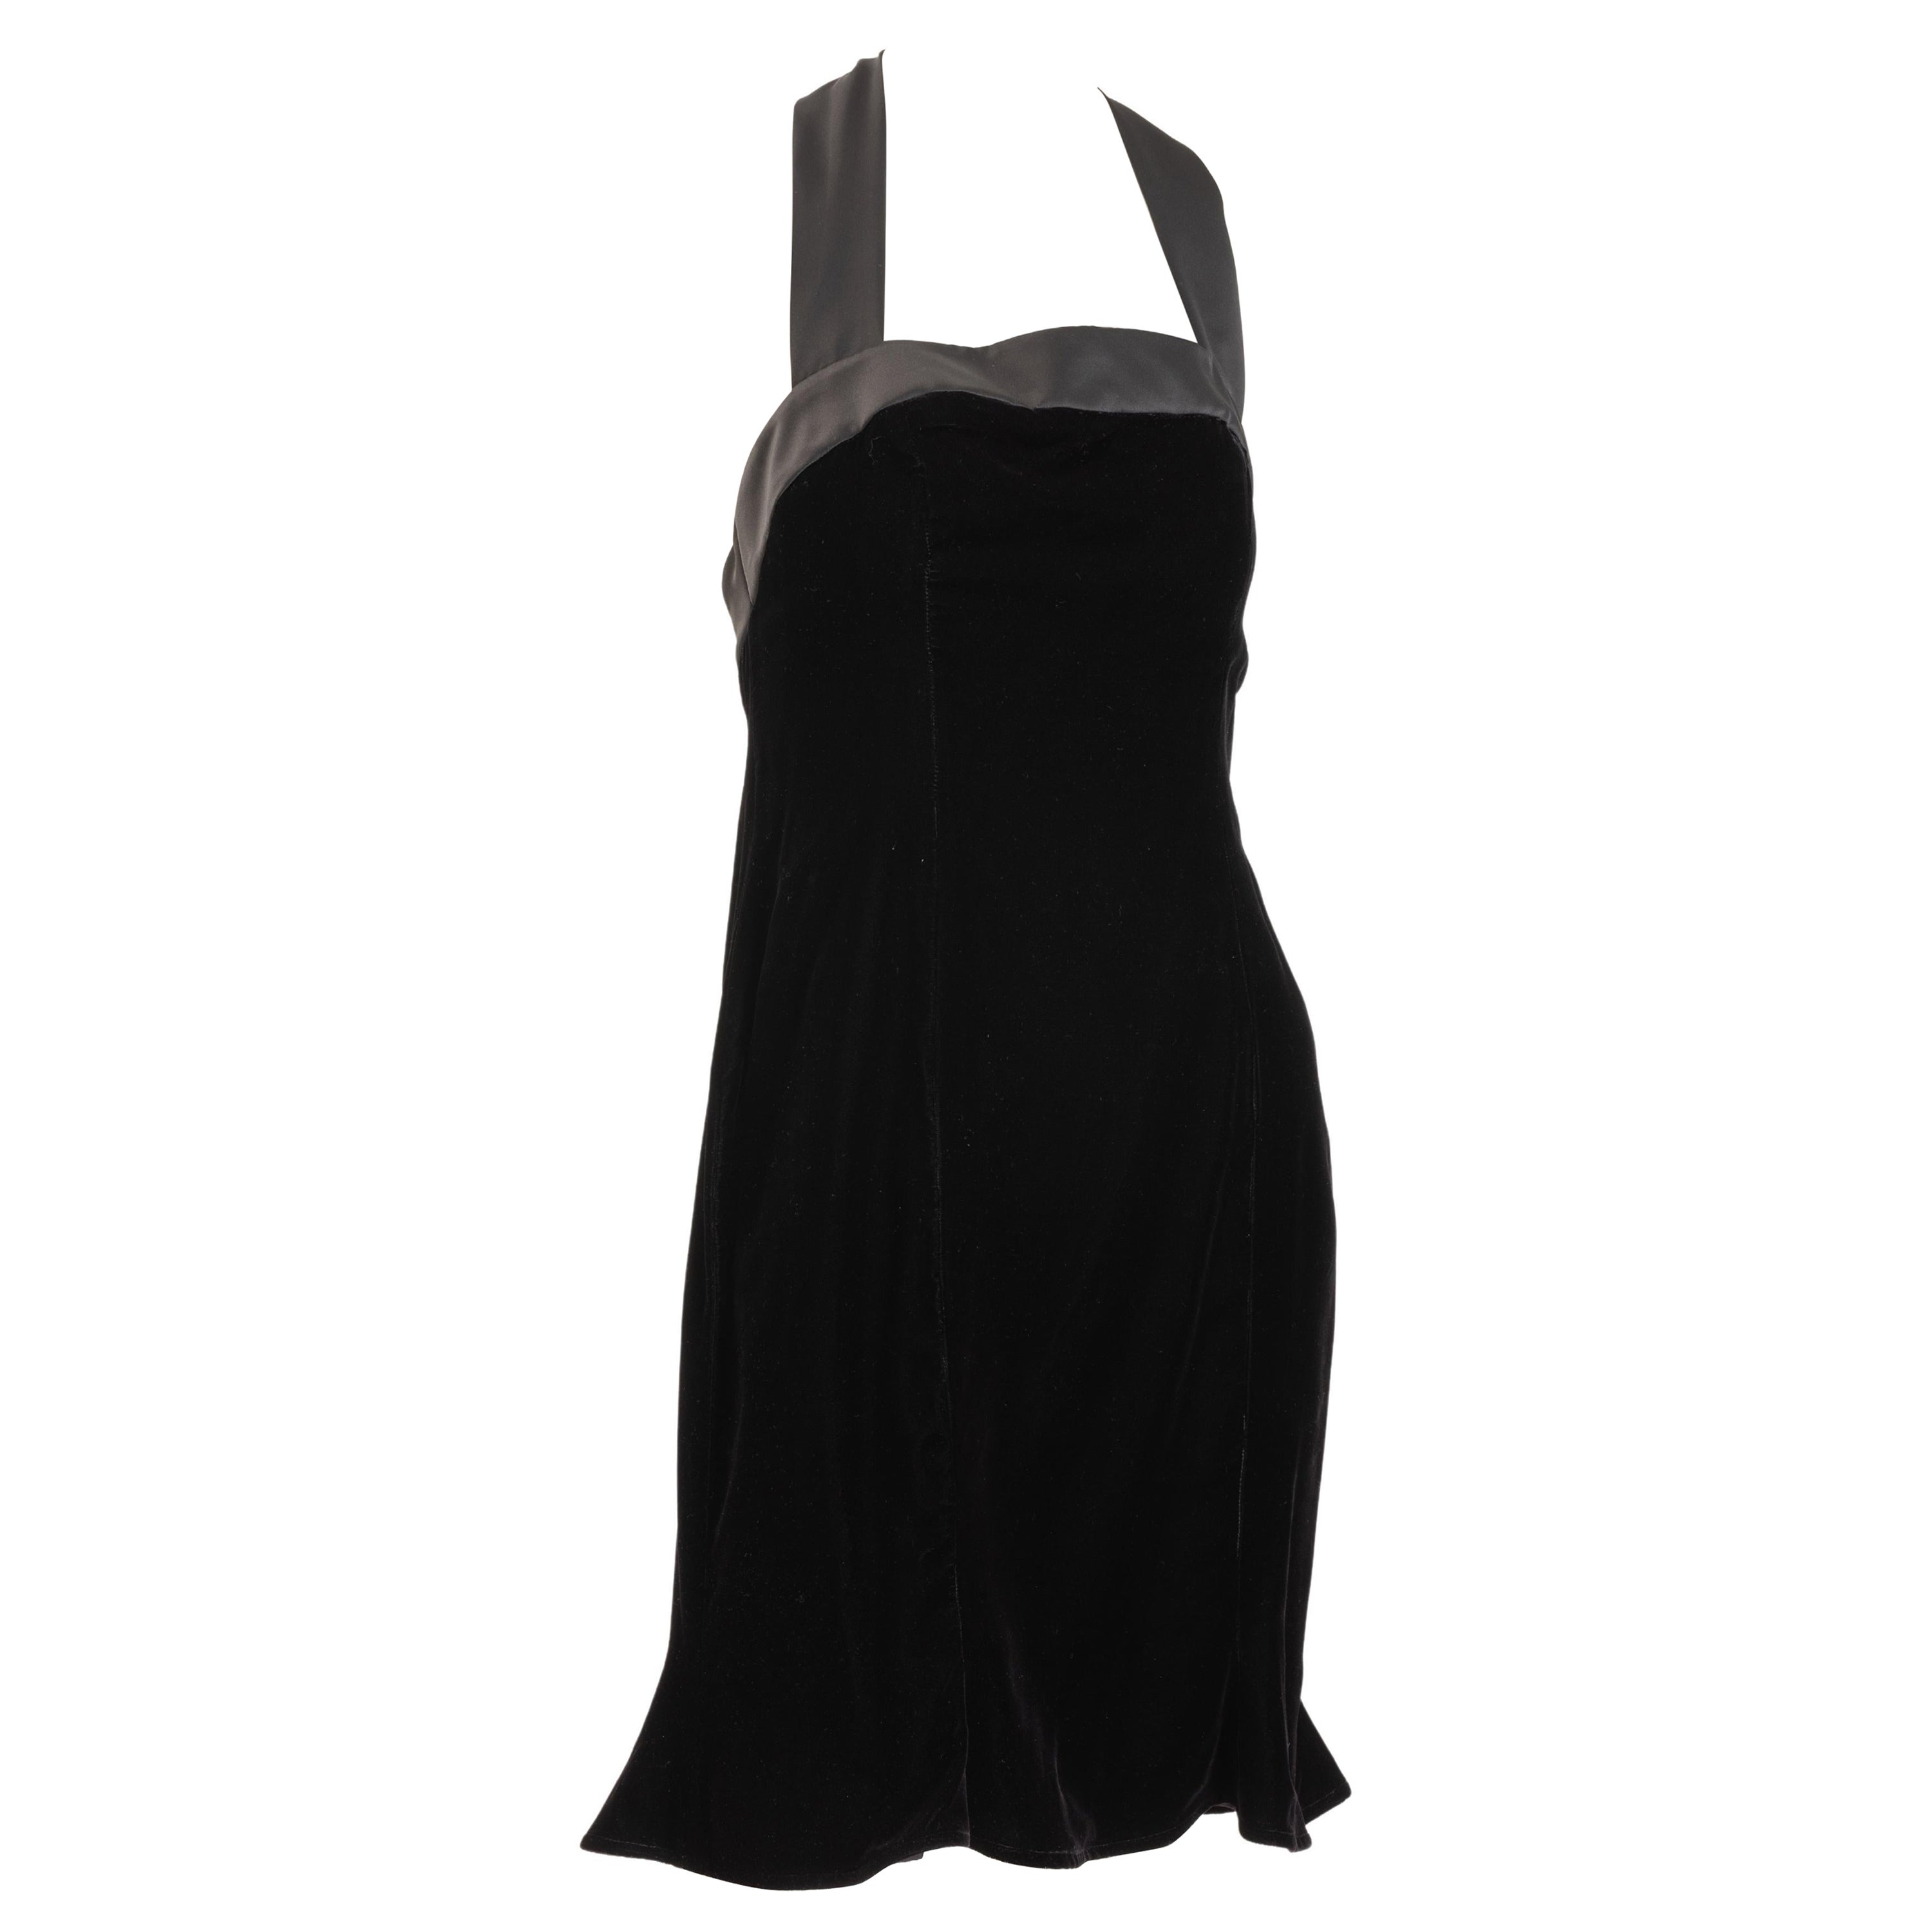 Nipon Boutique black velvet cocktail dress with satin ribbon trim and bows tied at neck and back.
 Flirty six paneled dress body with flared bottom.  Fully lined. Size US 6
Labeled, Nipon Boutique  65% Acetate 35% rayon velvet .